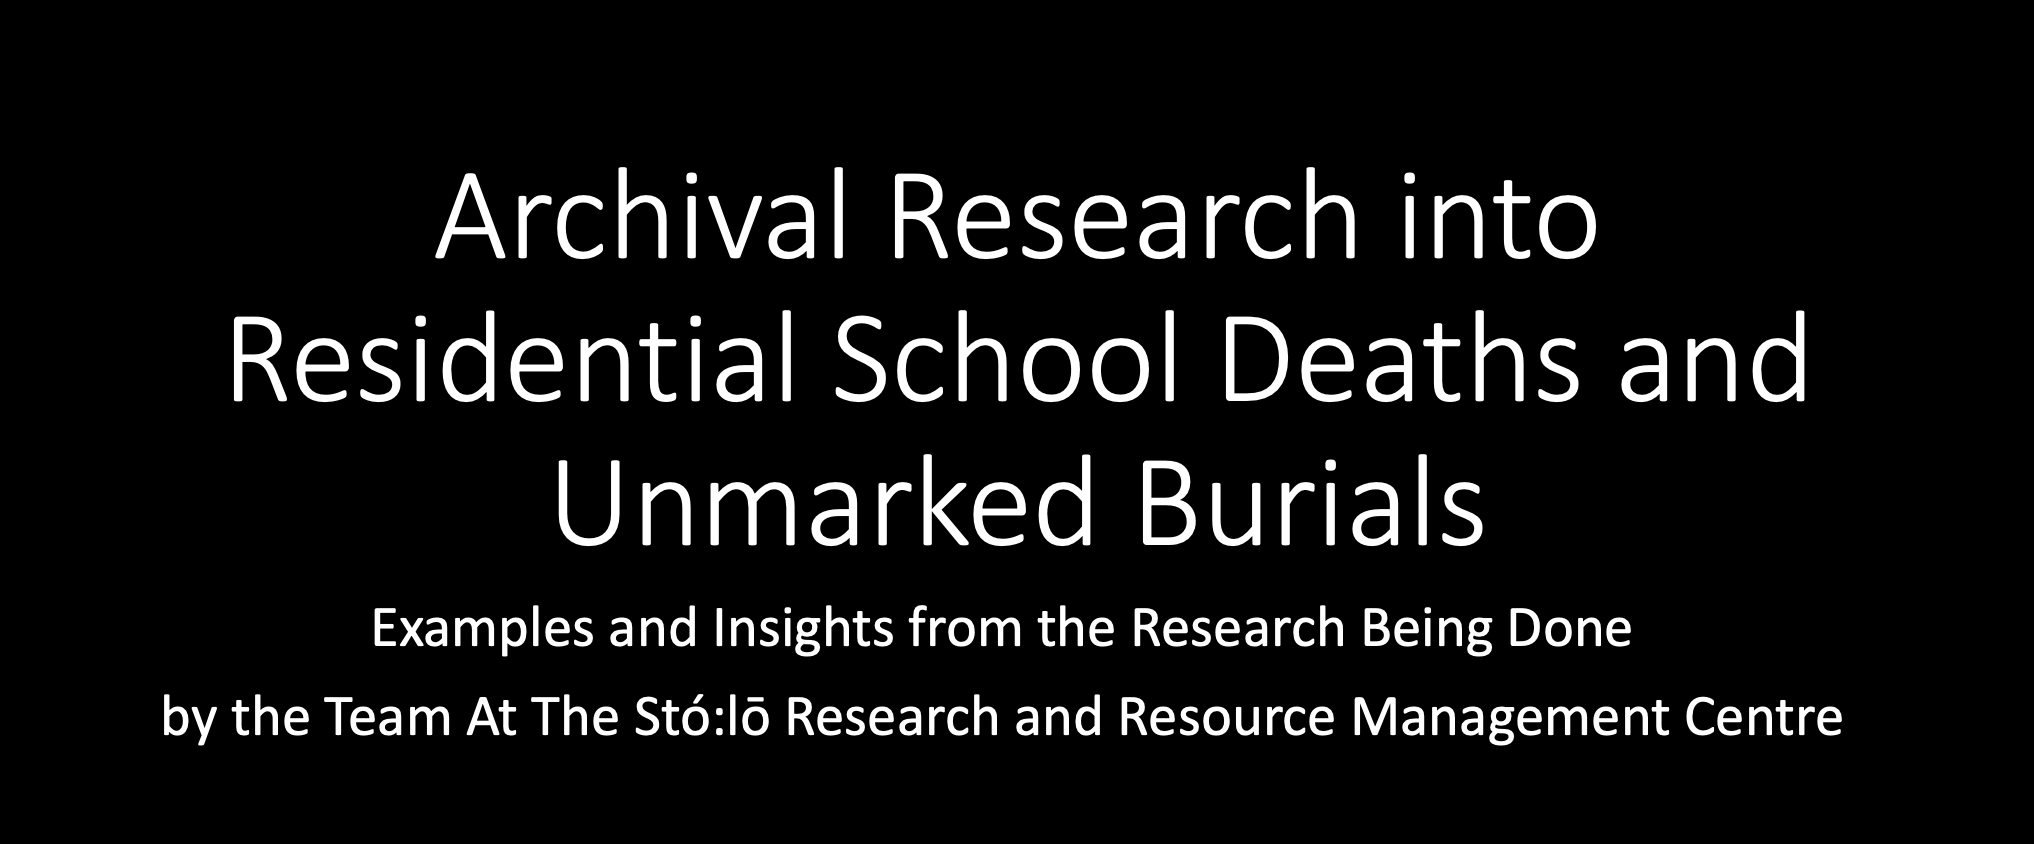 Archival Research into Residential School Deaths and Unmarked Burials